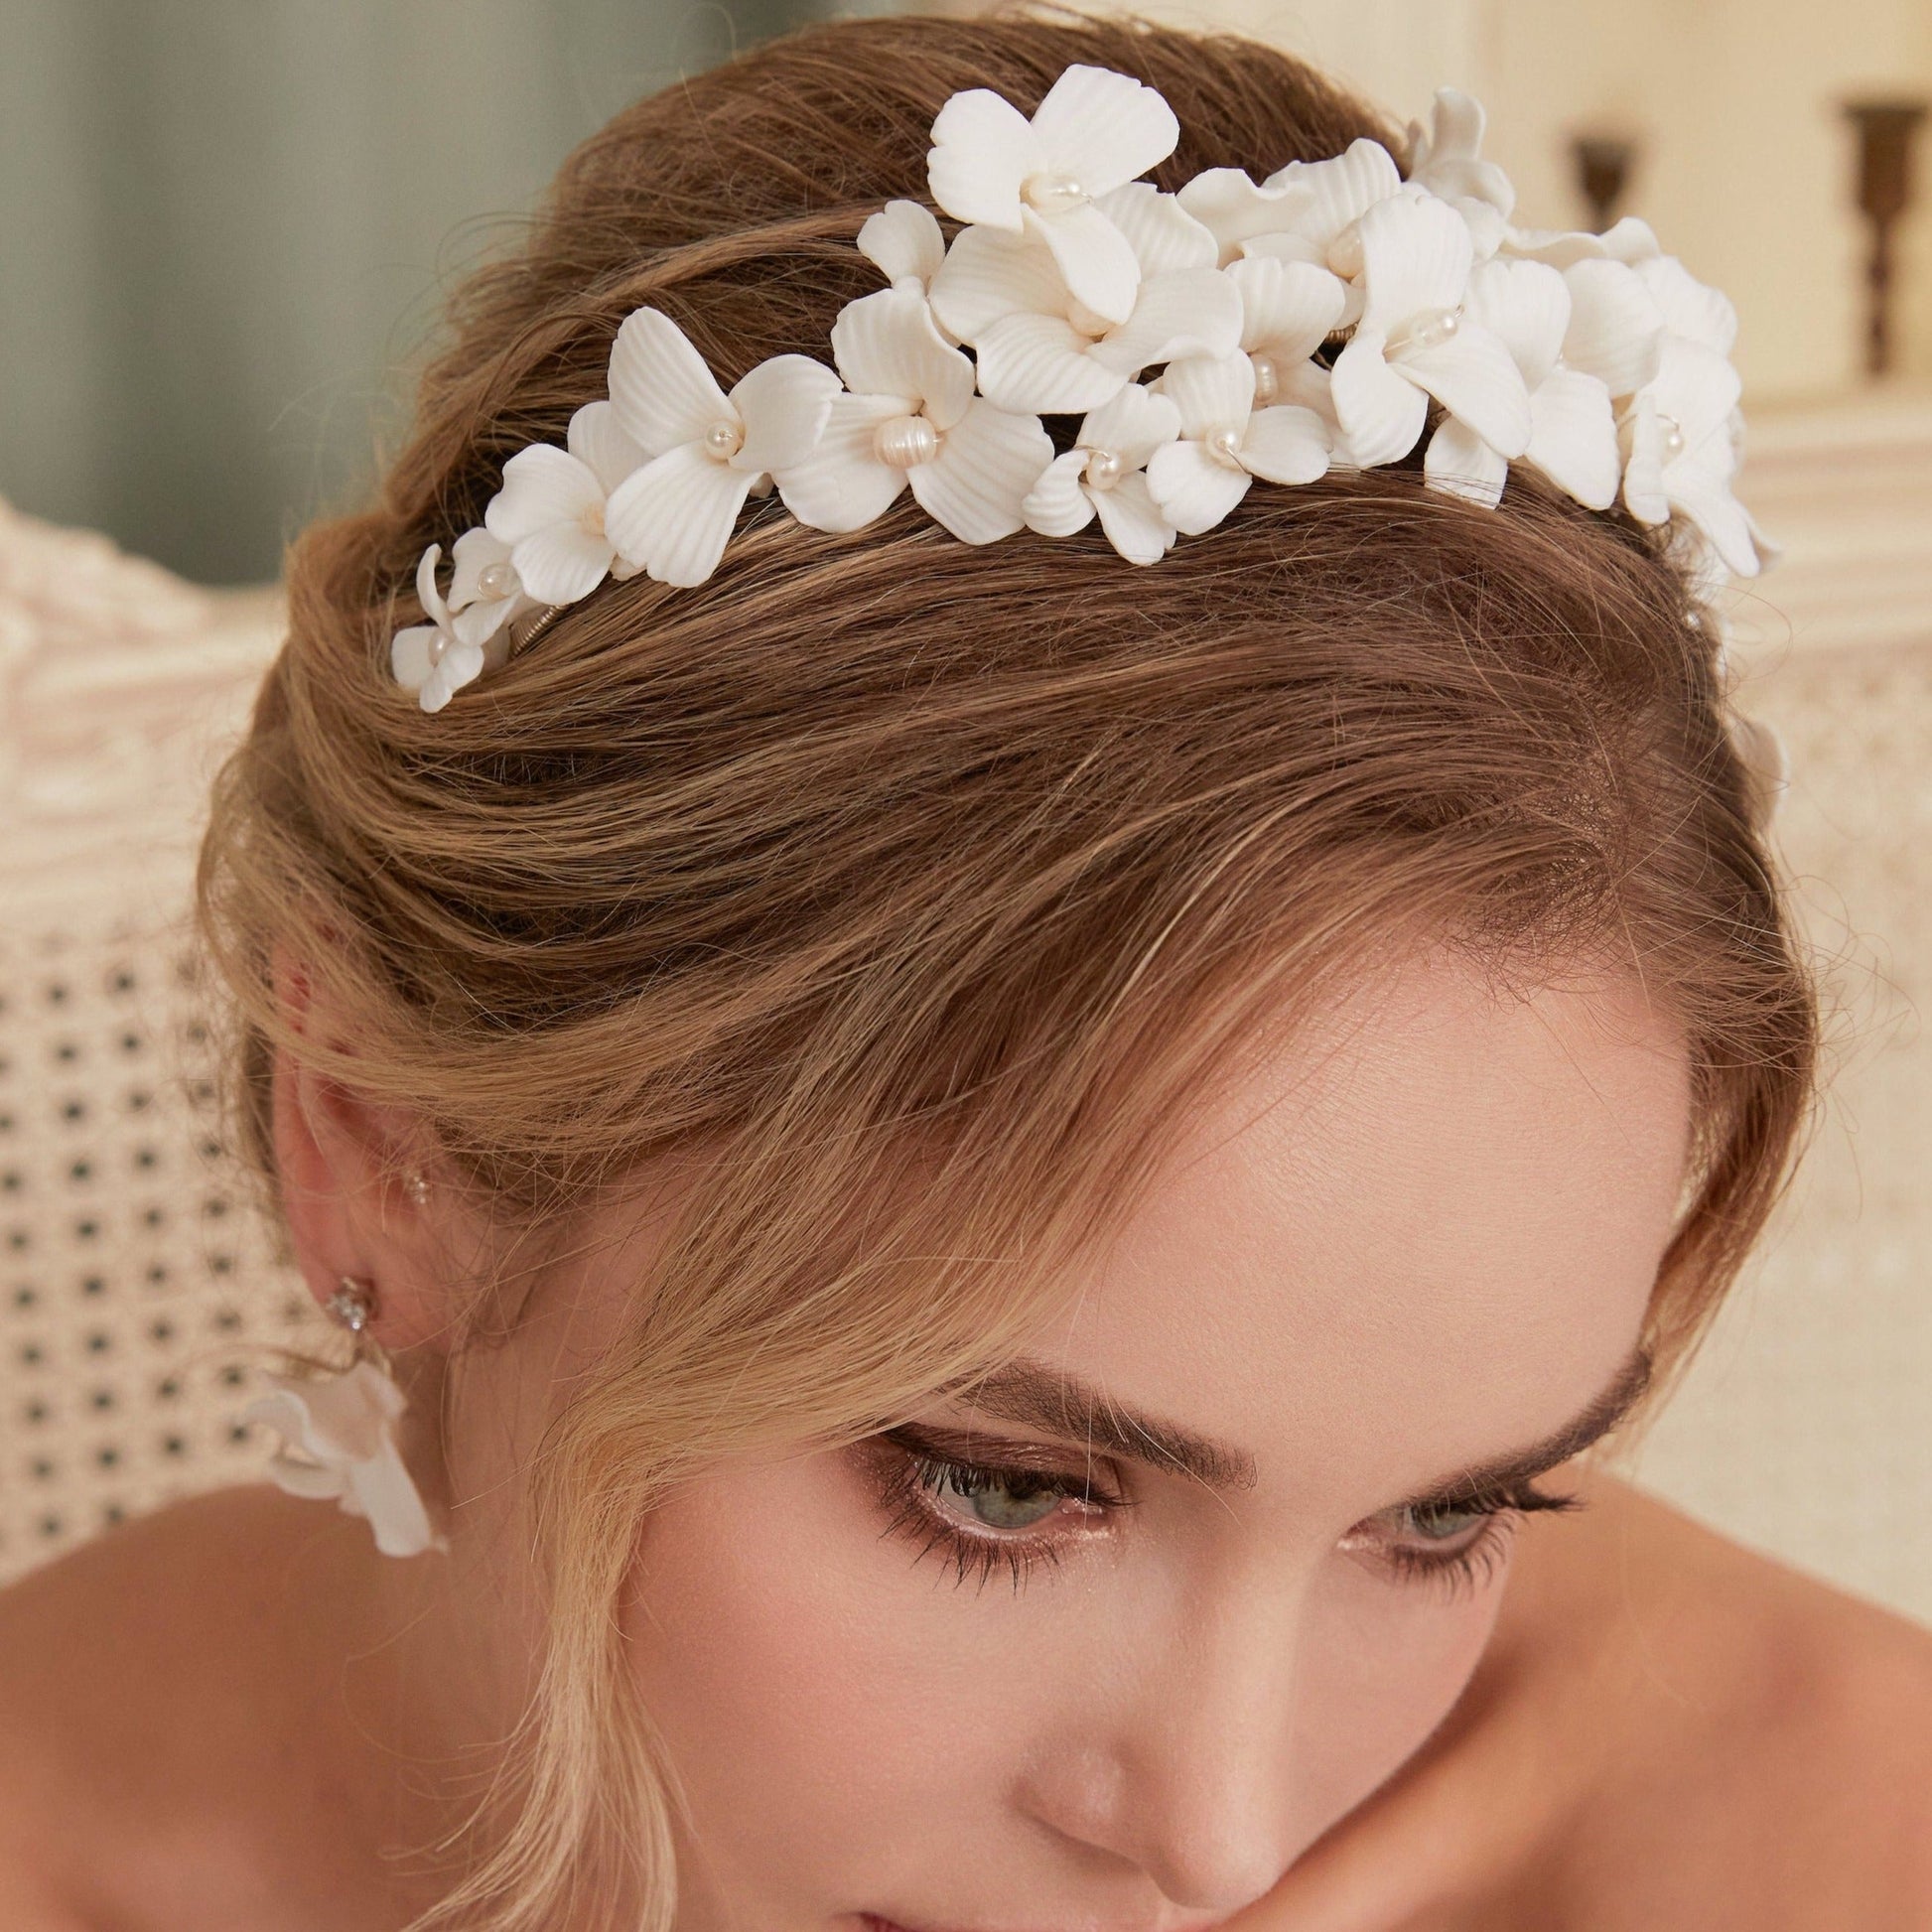 A gloriously romantic hand-sculpted porcelain bridal crown. Made with an arrangement of individually crafted flowers and dainty pearls. This full and textured headband makes a statement but yet still feels incredibly feminine.